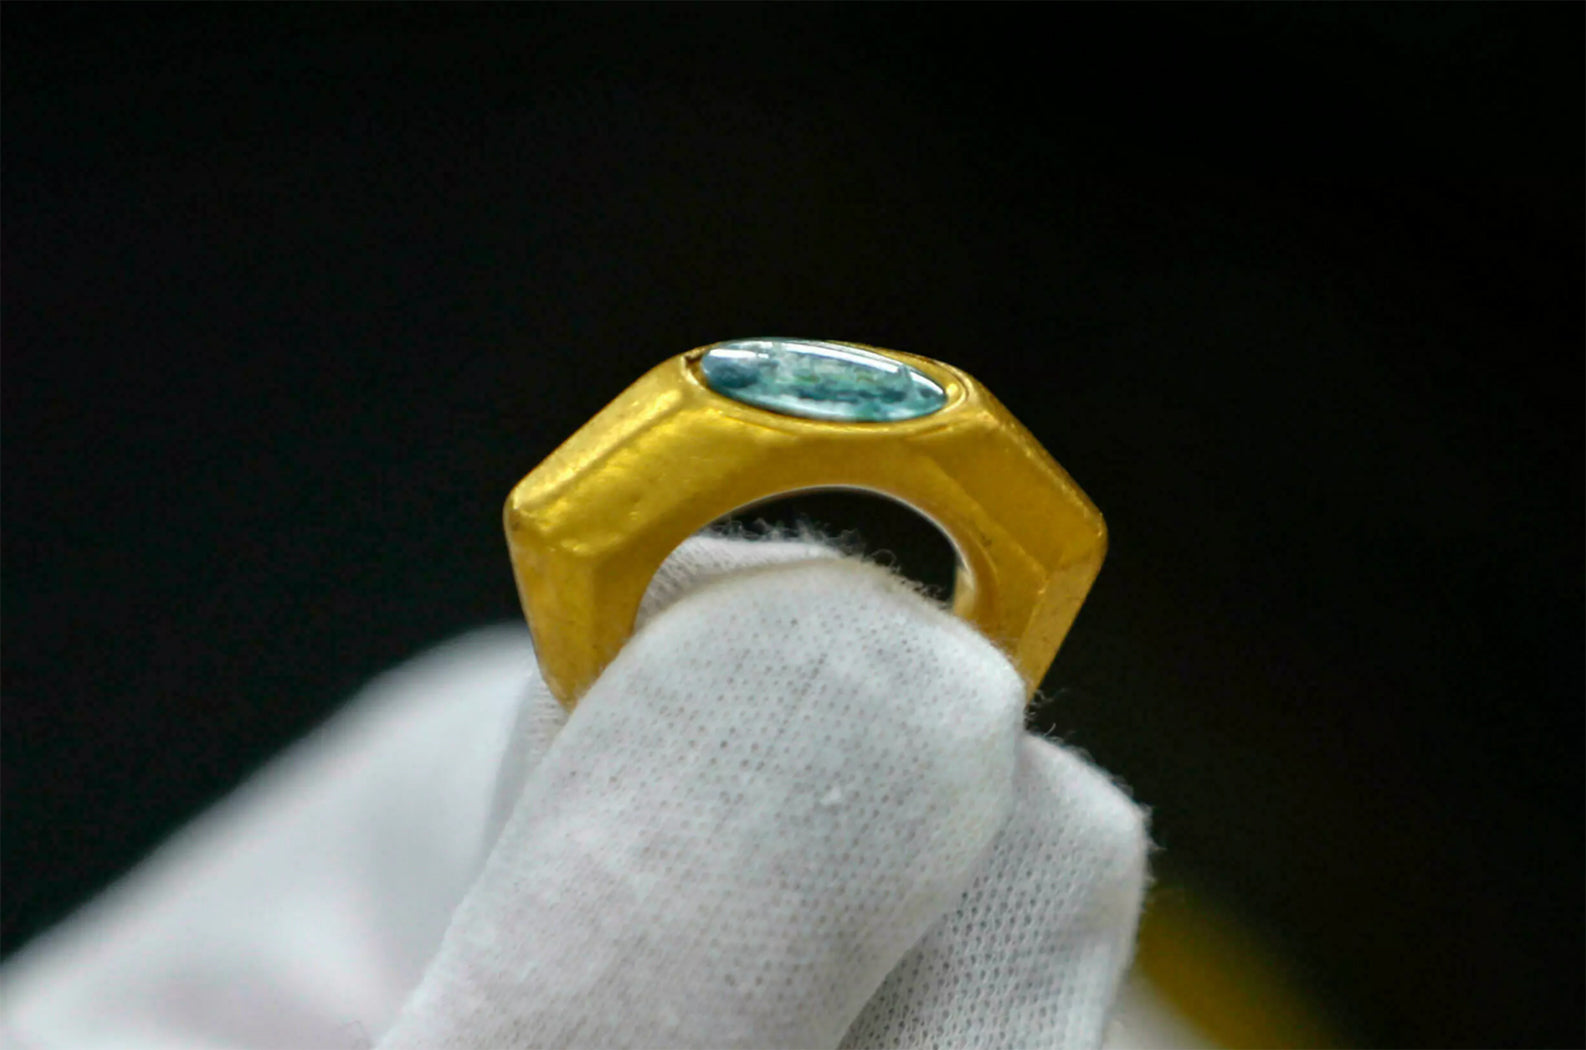 Ancient Gold Ring The Symbol Of The "Good Shepherd" 